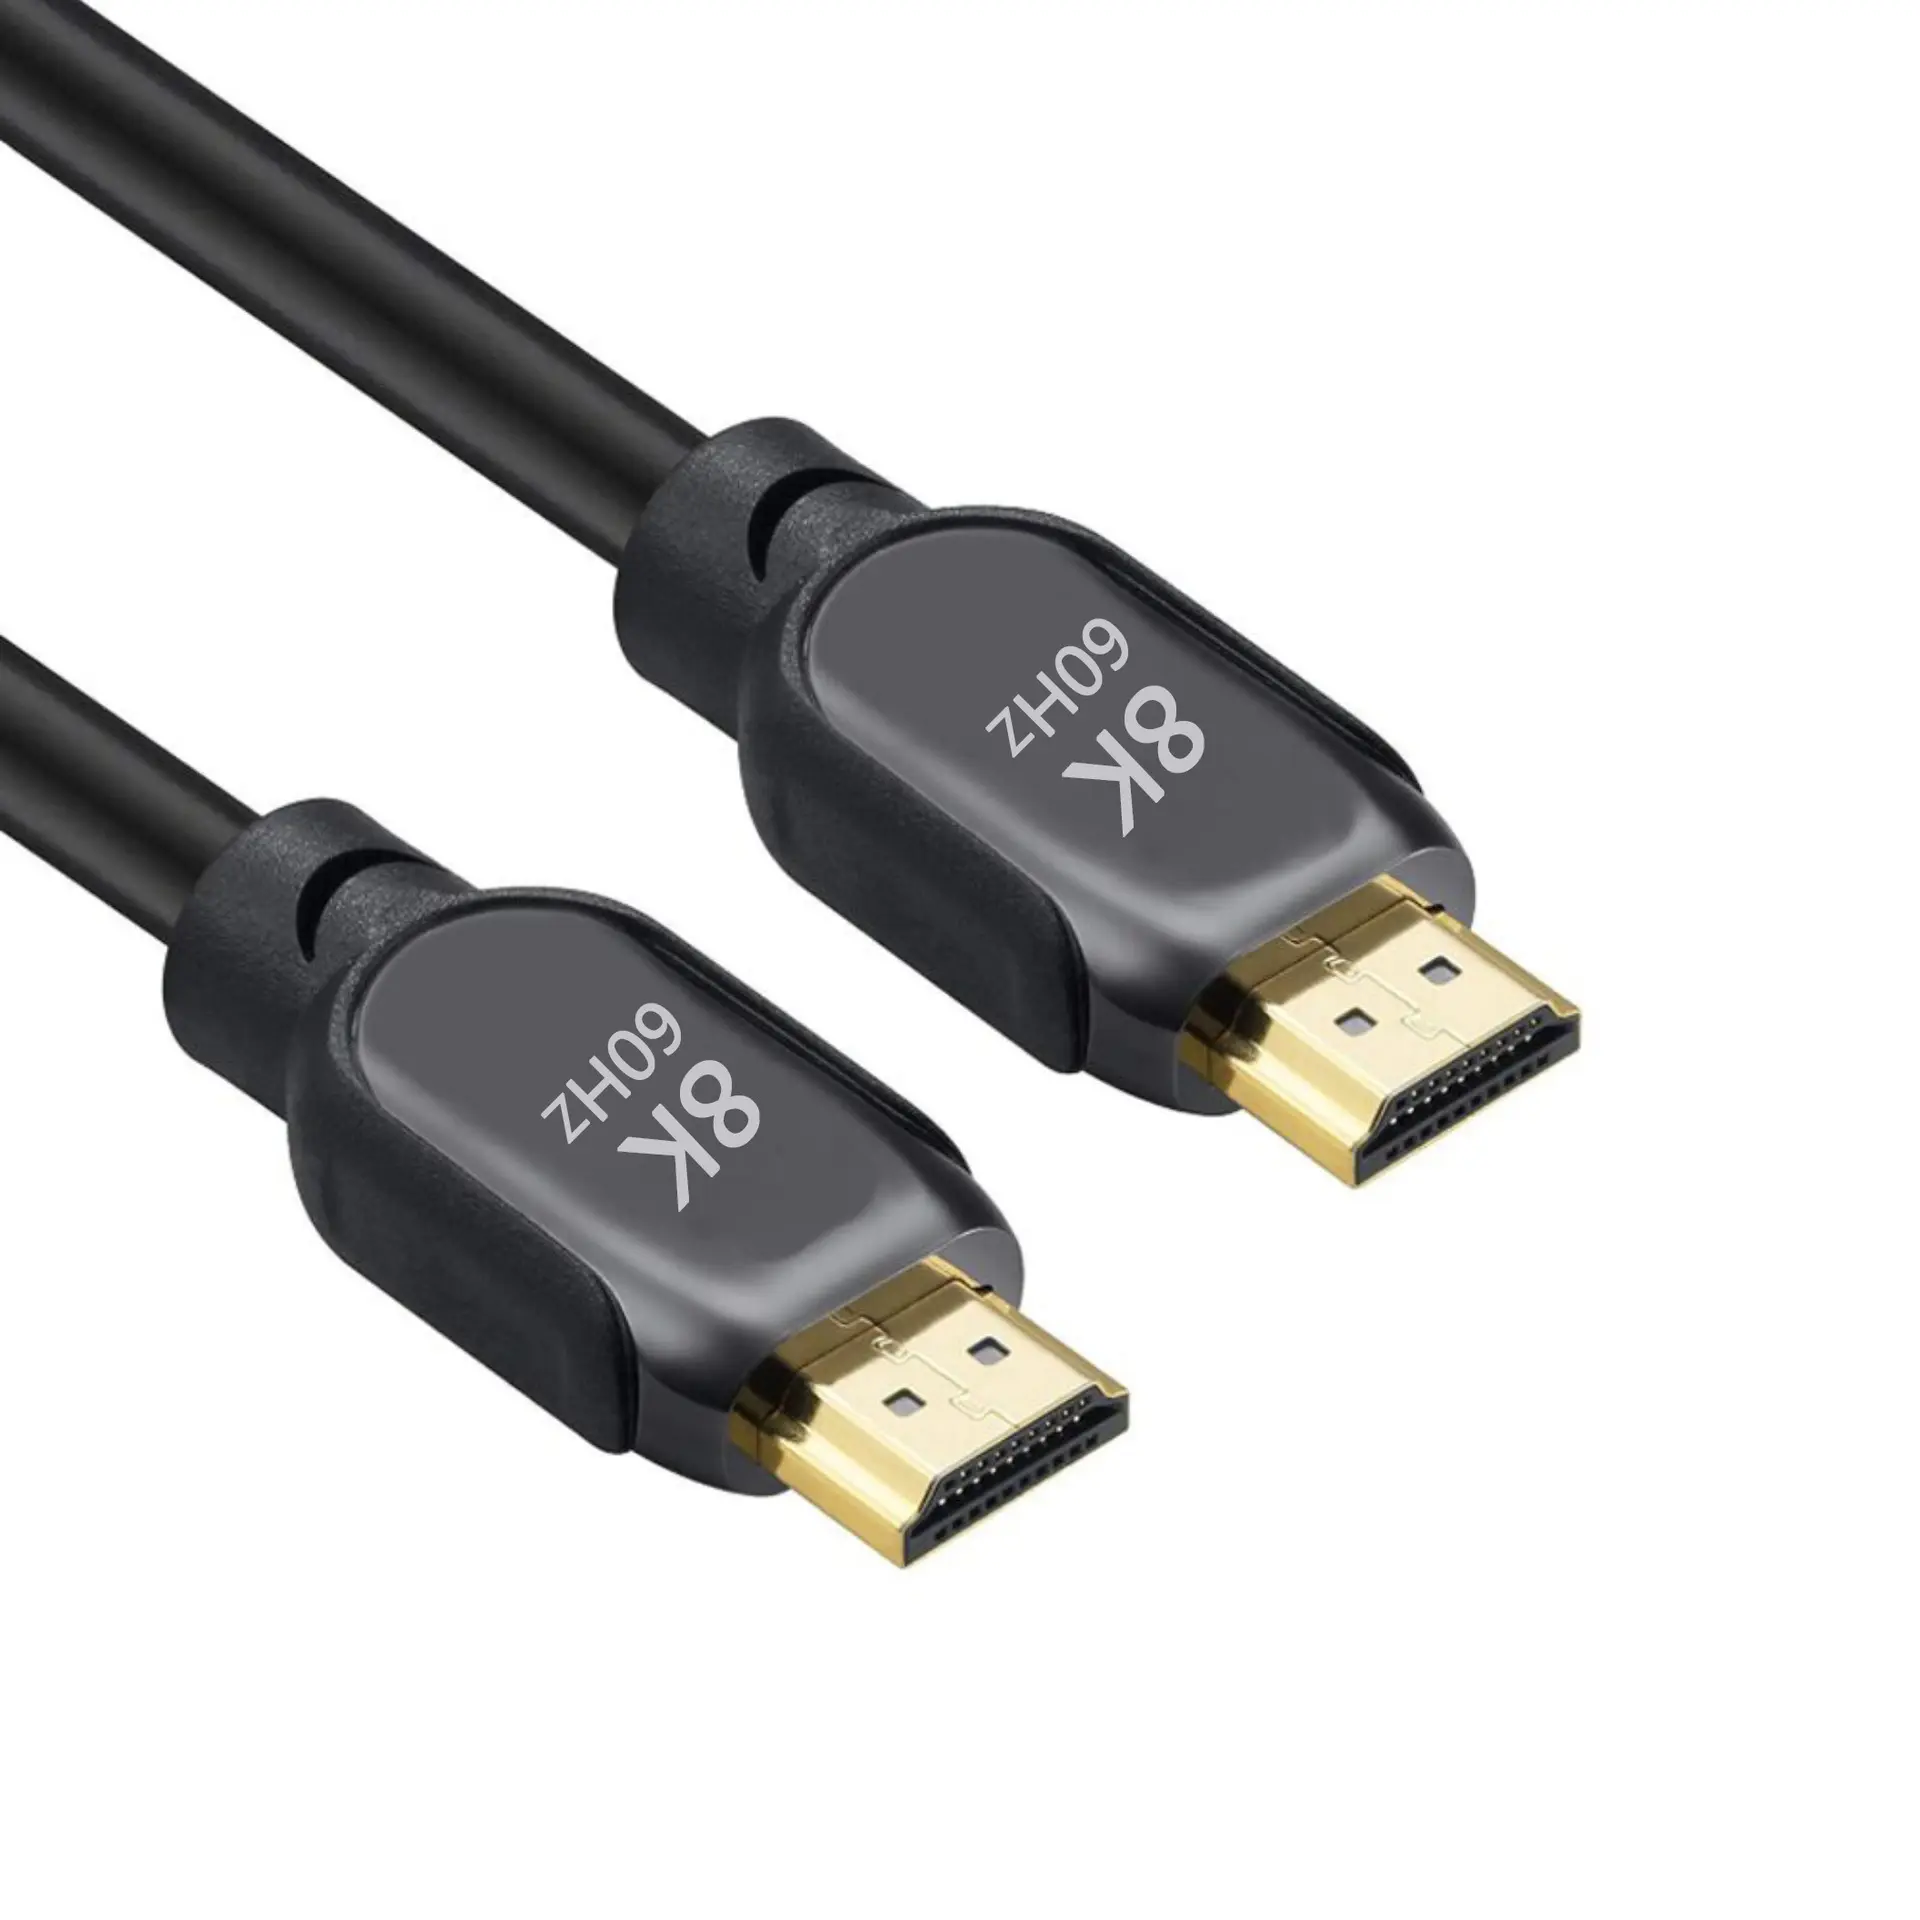 Support Dynamic HDR 3D Cable Hdmi 8k Ultra HD 7680*4320 Hdmi Cable 1m 1.5m 2m 3m Hdmi Cable Connector High Speed